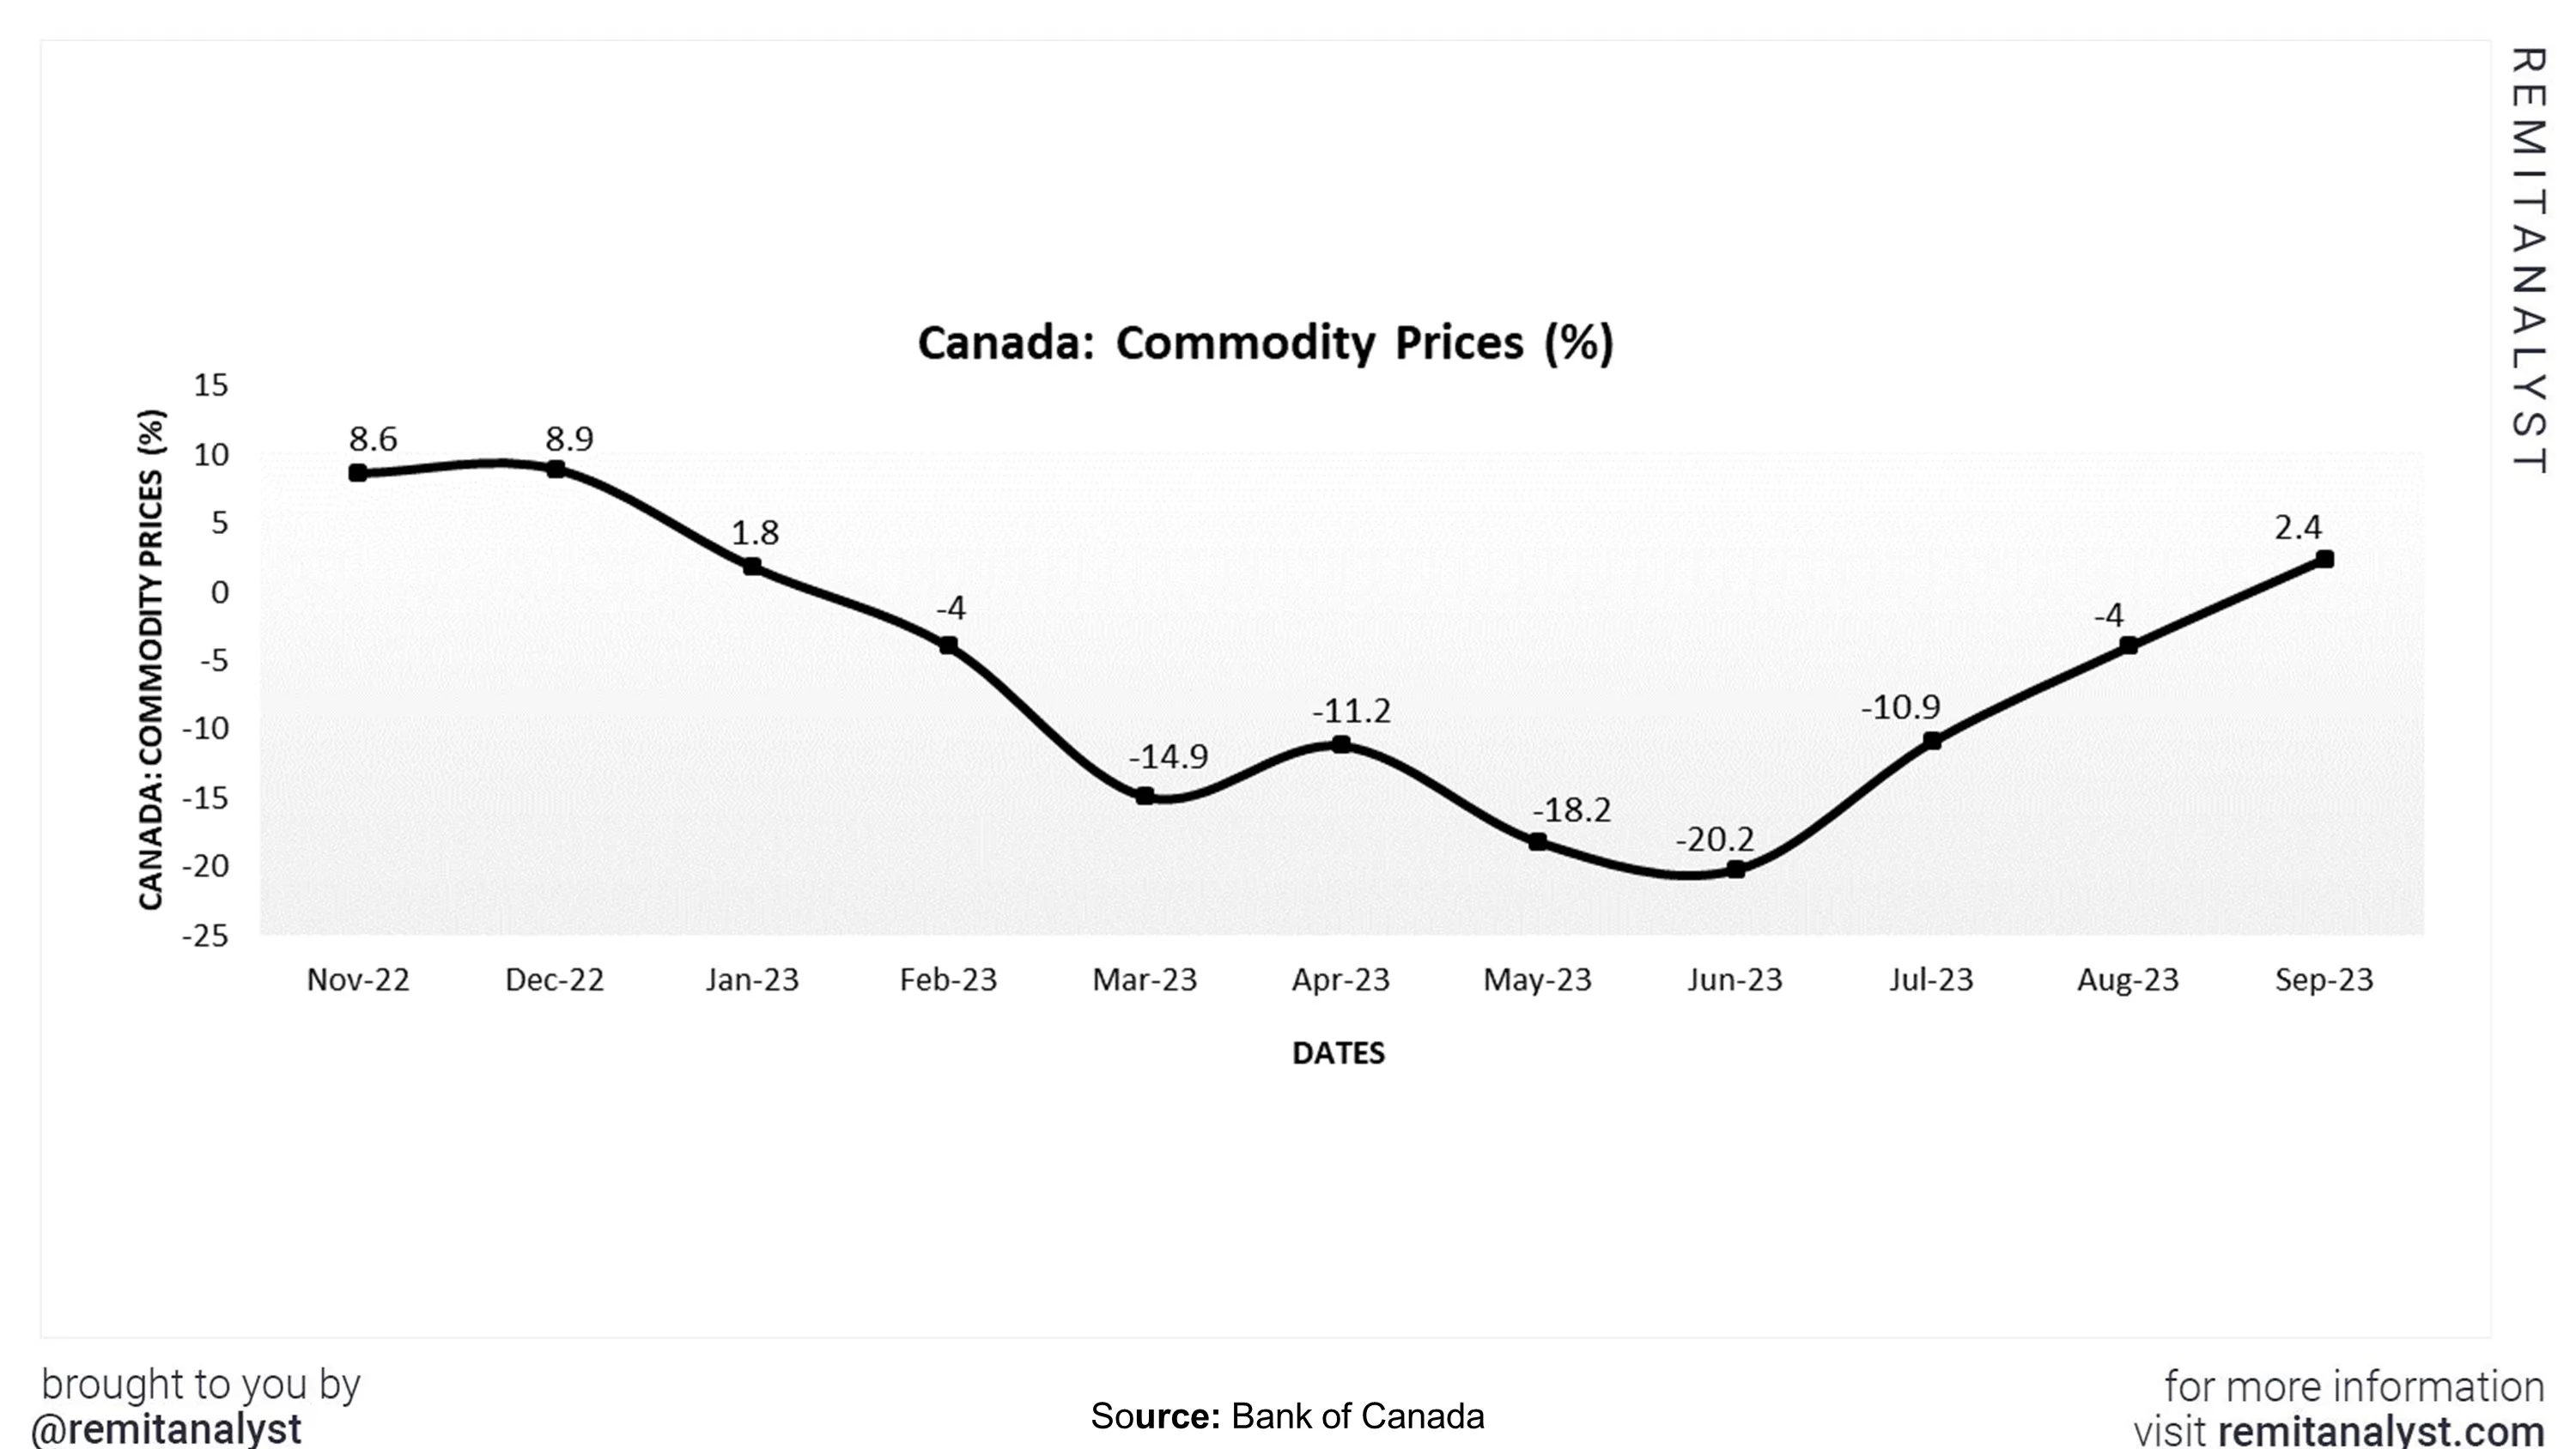 commodity-prices-canada-from-nov-2022-to-sep-2023